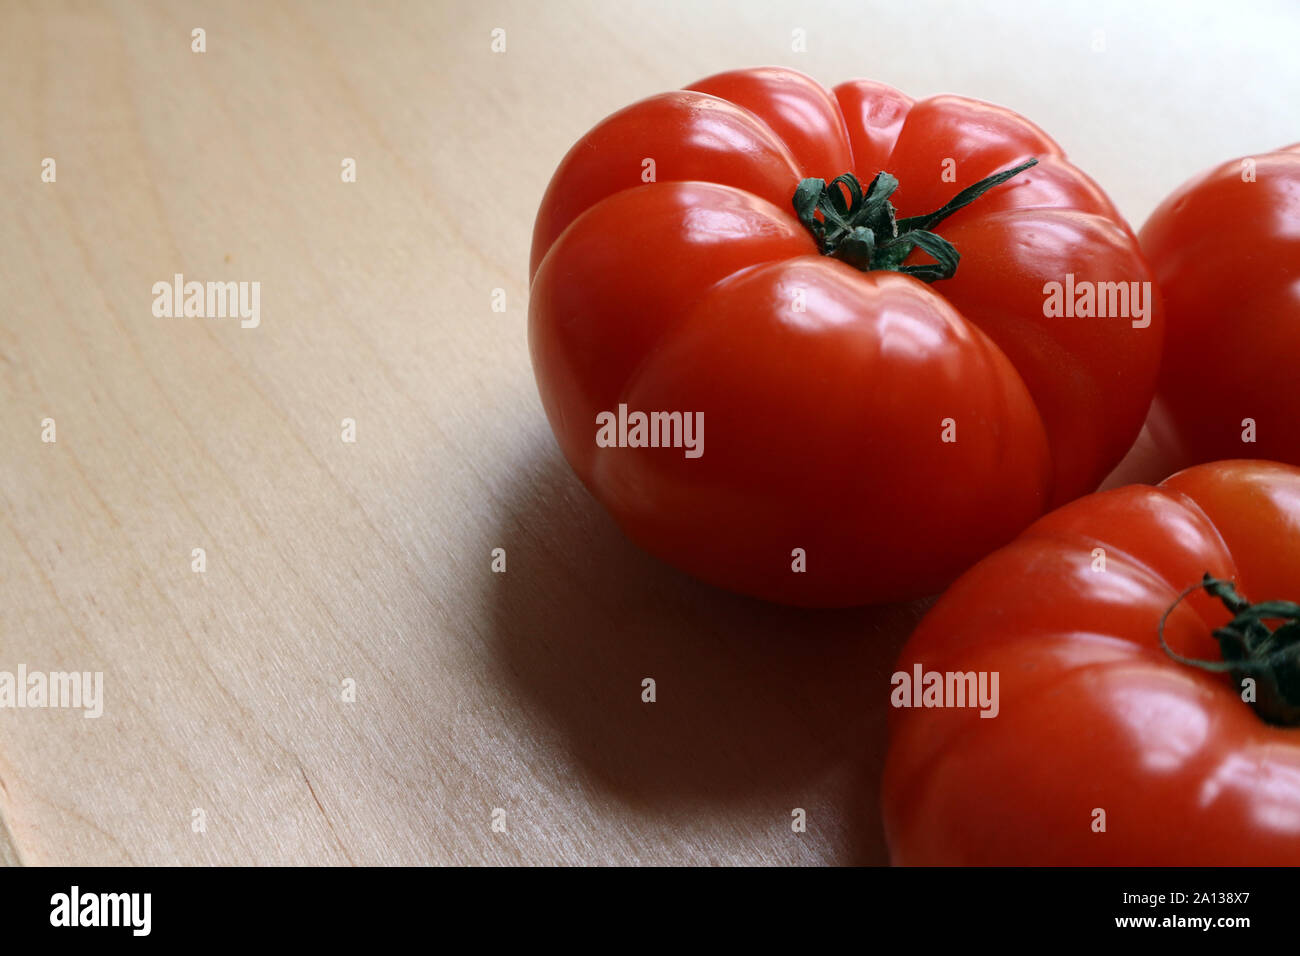 Large ripe red whole tomatoes on chopping board Stock Photo